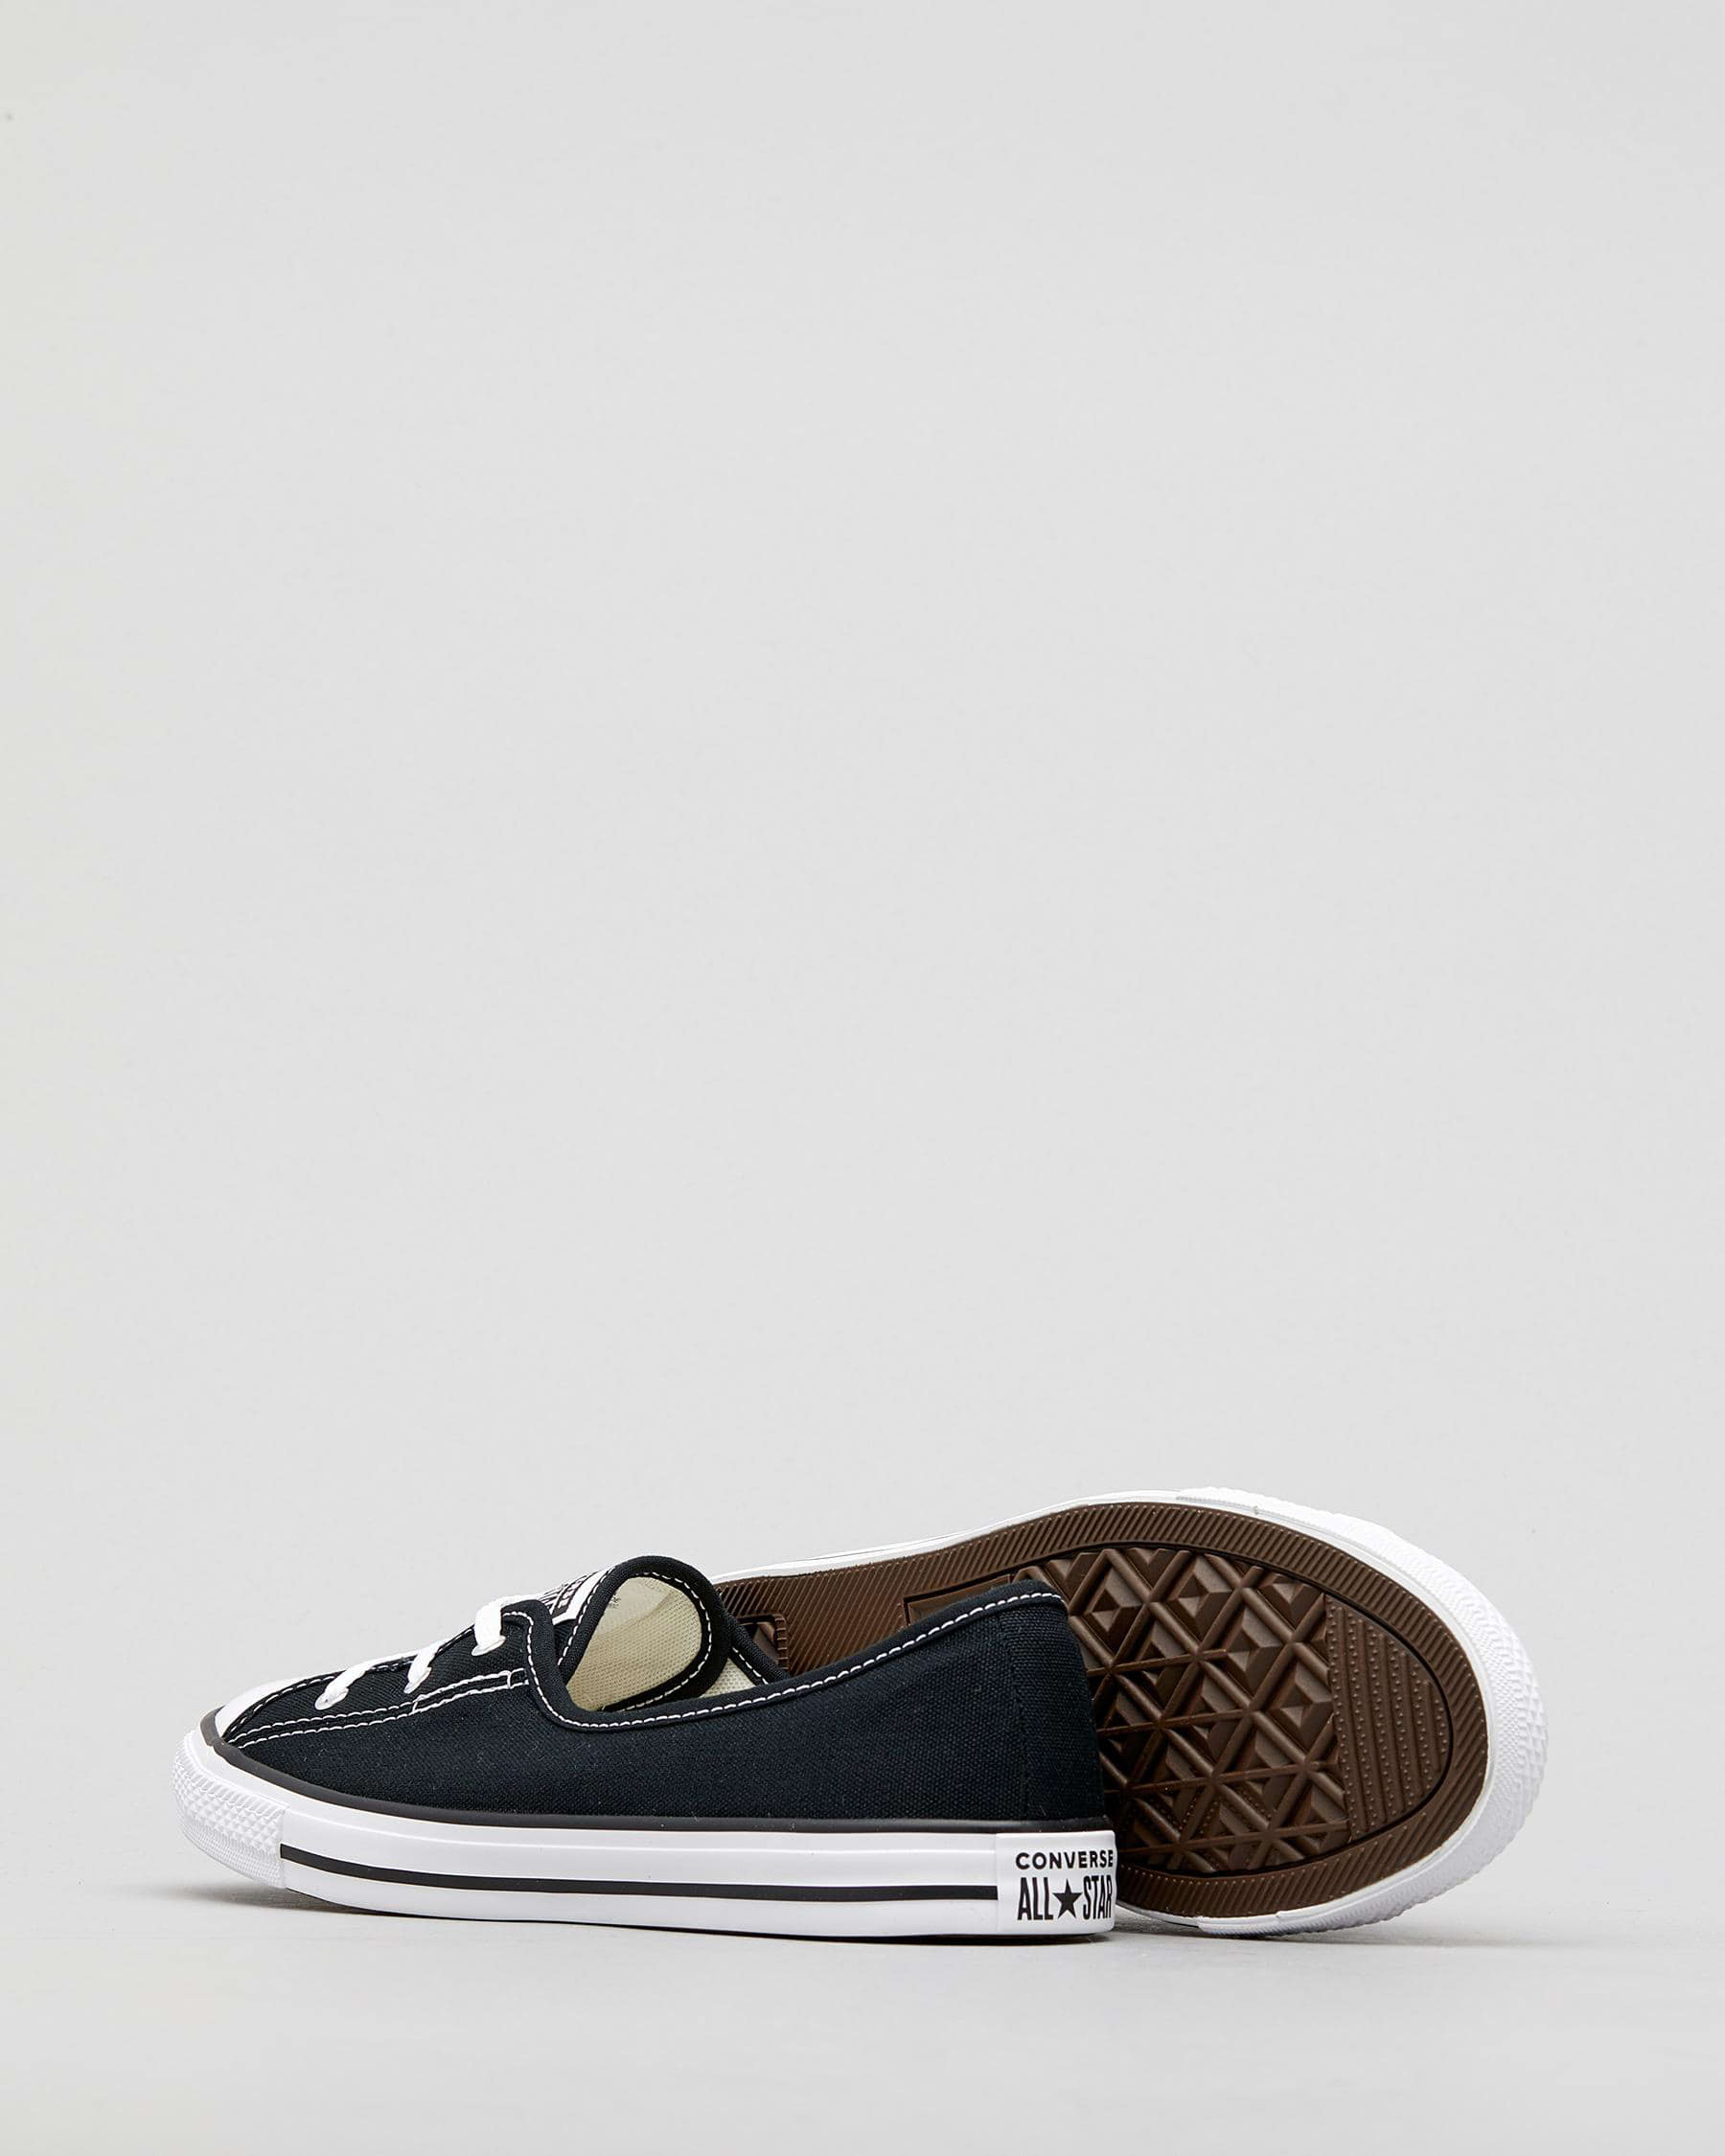 Womens Chuck Taylor Lace Low In Black/white/black - Fast Shipping & Easy Returns City Beach United States